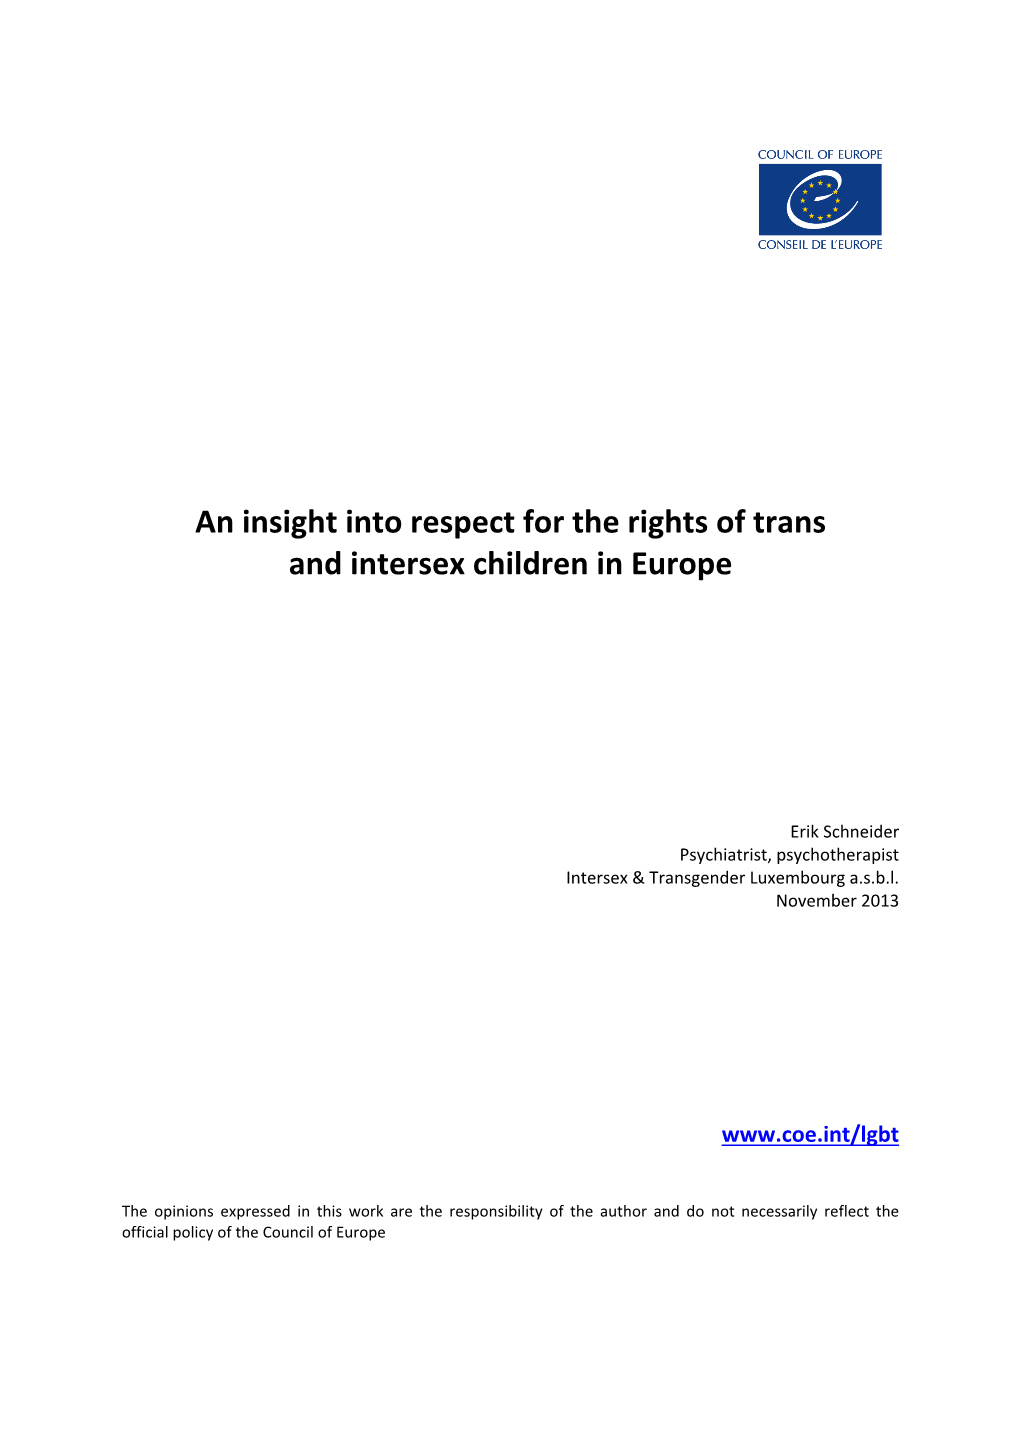 An Insight Into Respect for the Rights of Trans and Intersex Children in Europe